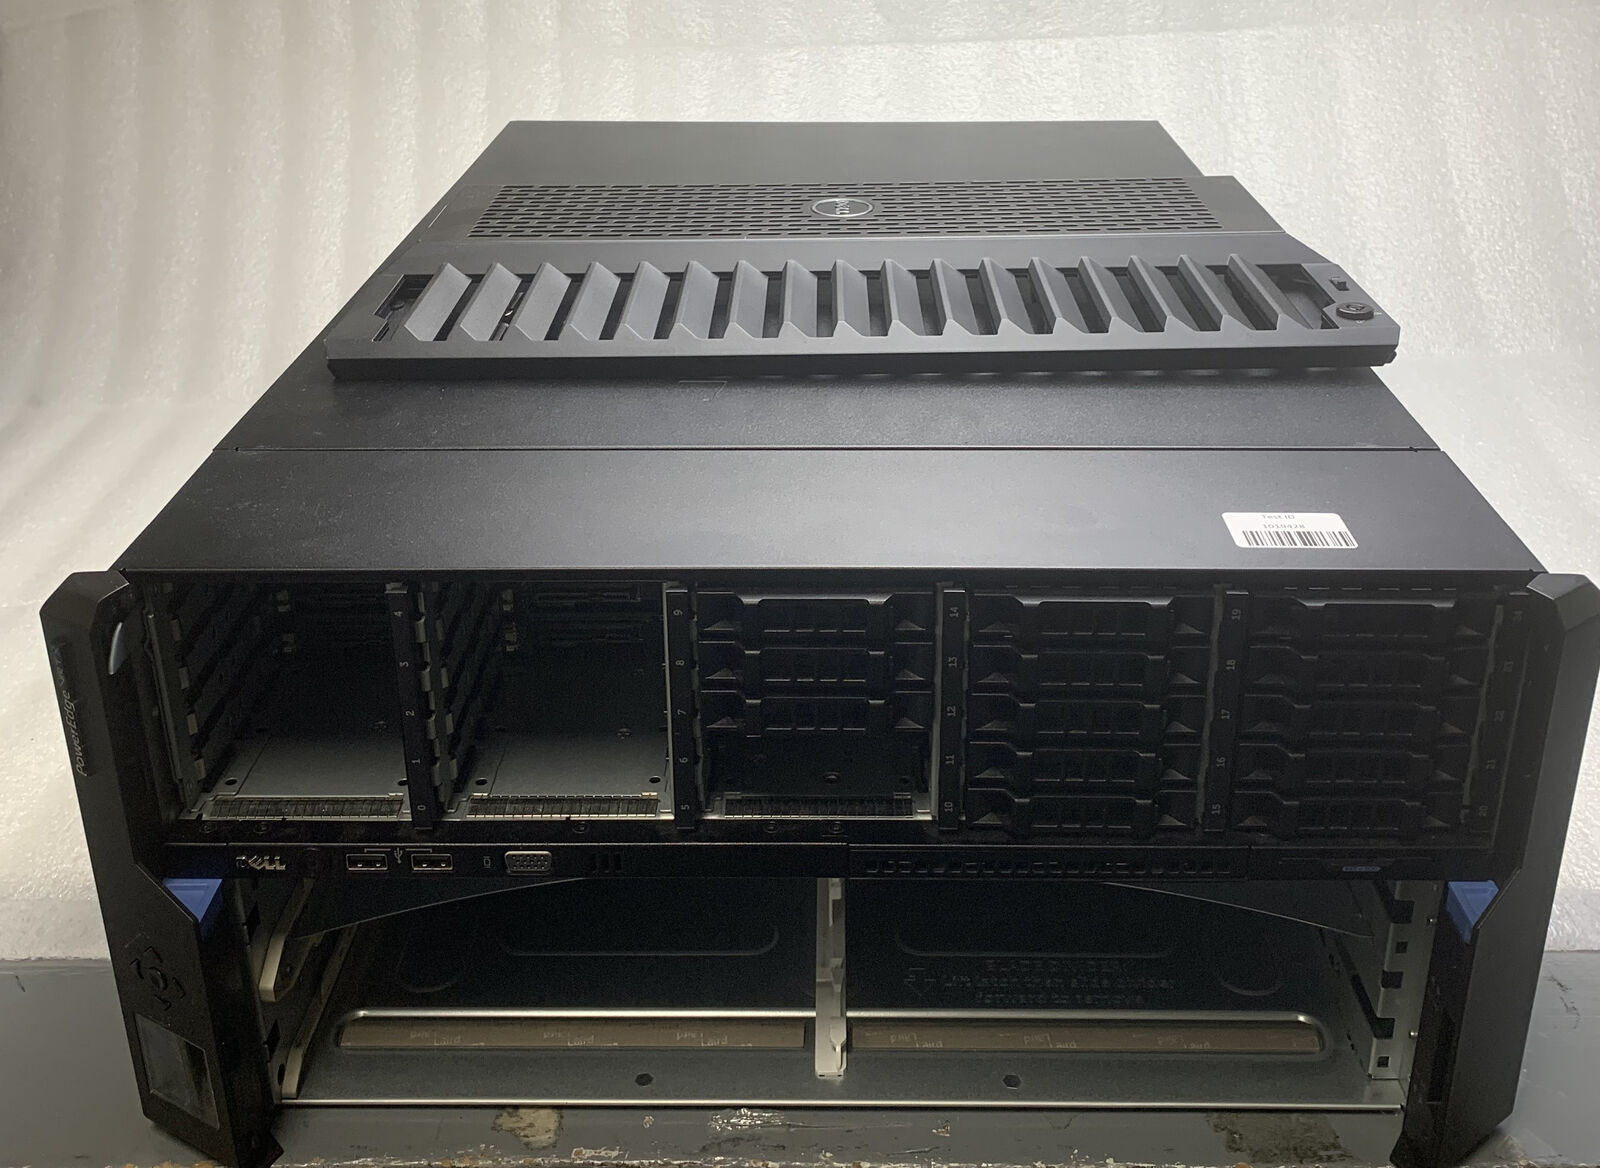 Dell PowerEdge VRTX Blade Chassis 2.5